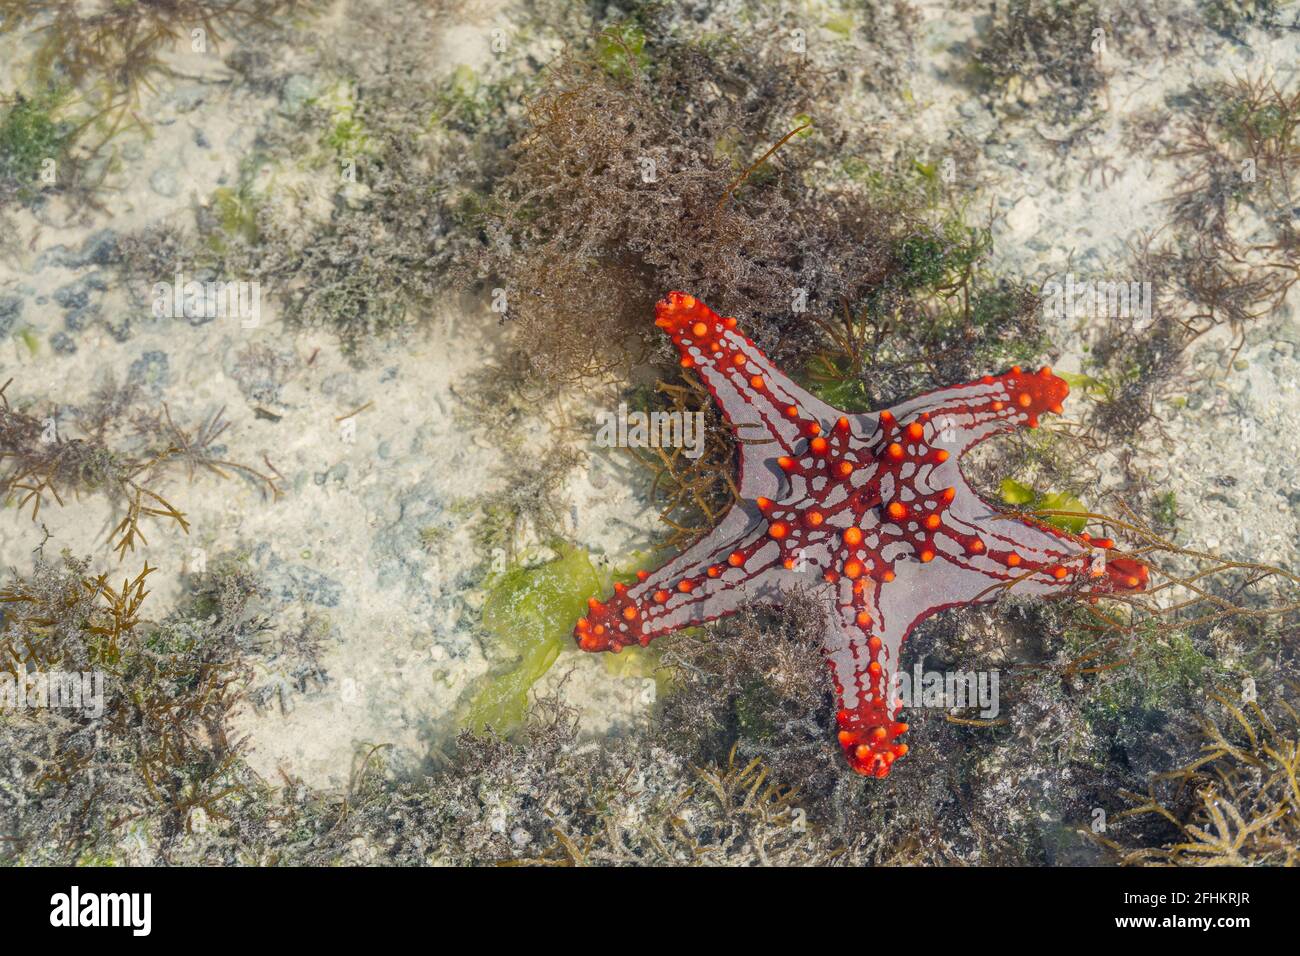 Colorful african red-knobbed Sea Star at low tide on wet sand, Zanzibar island, Tanzania Stock Photo